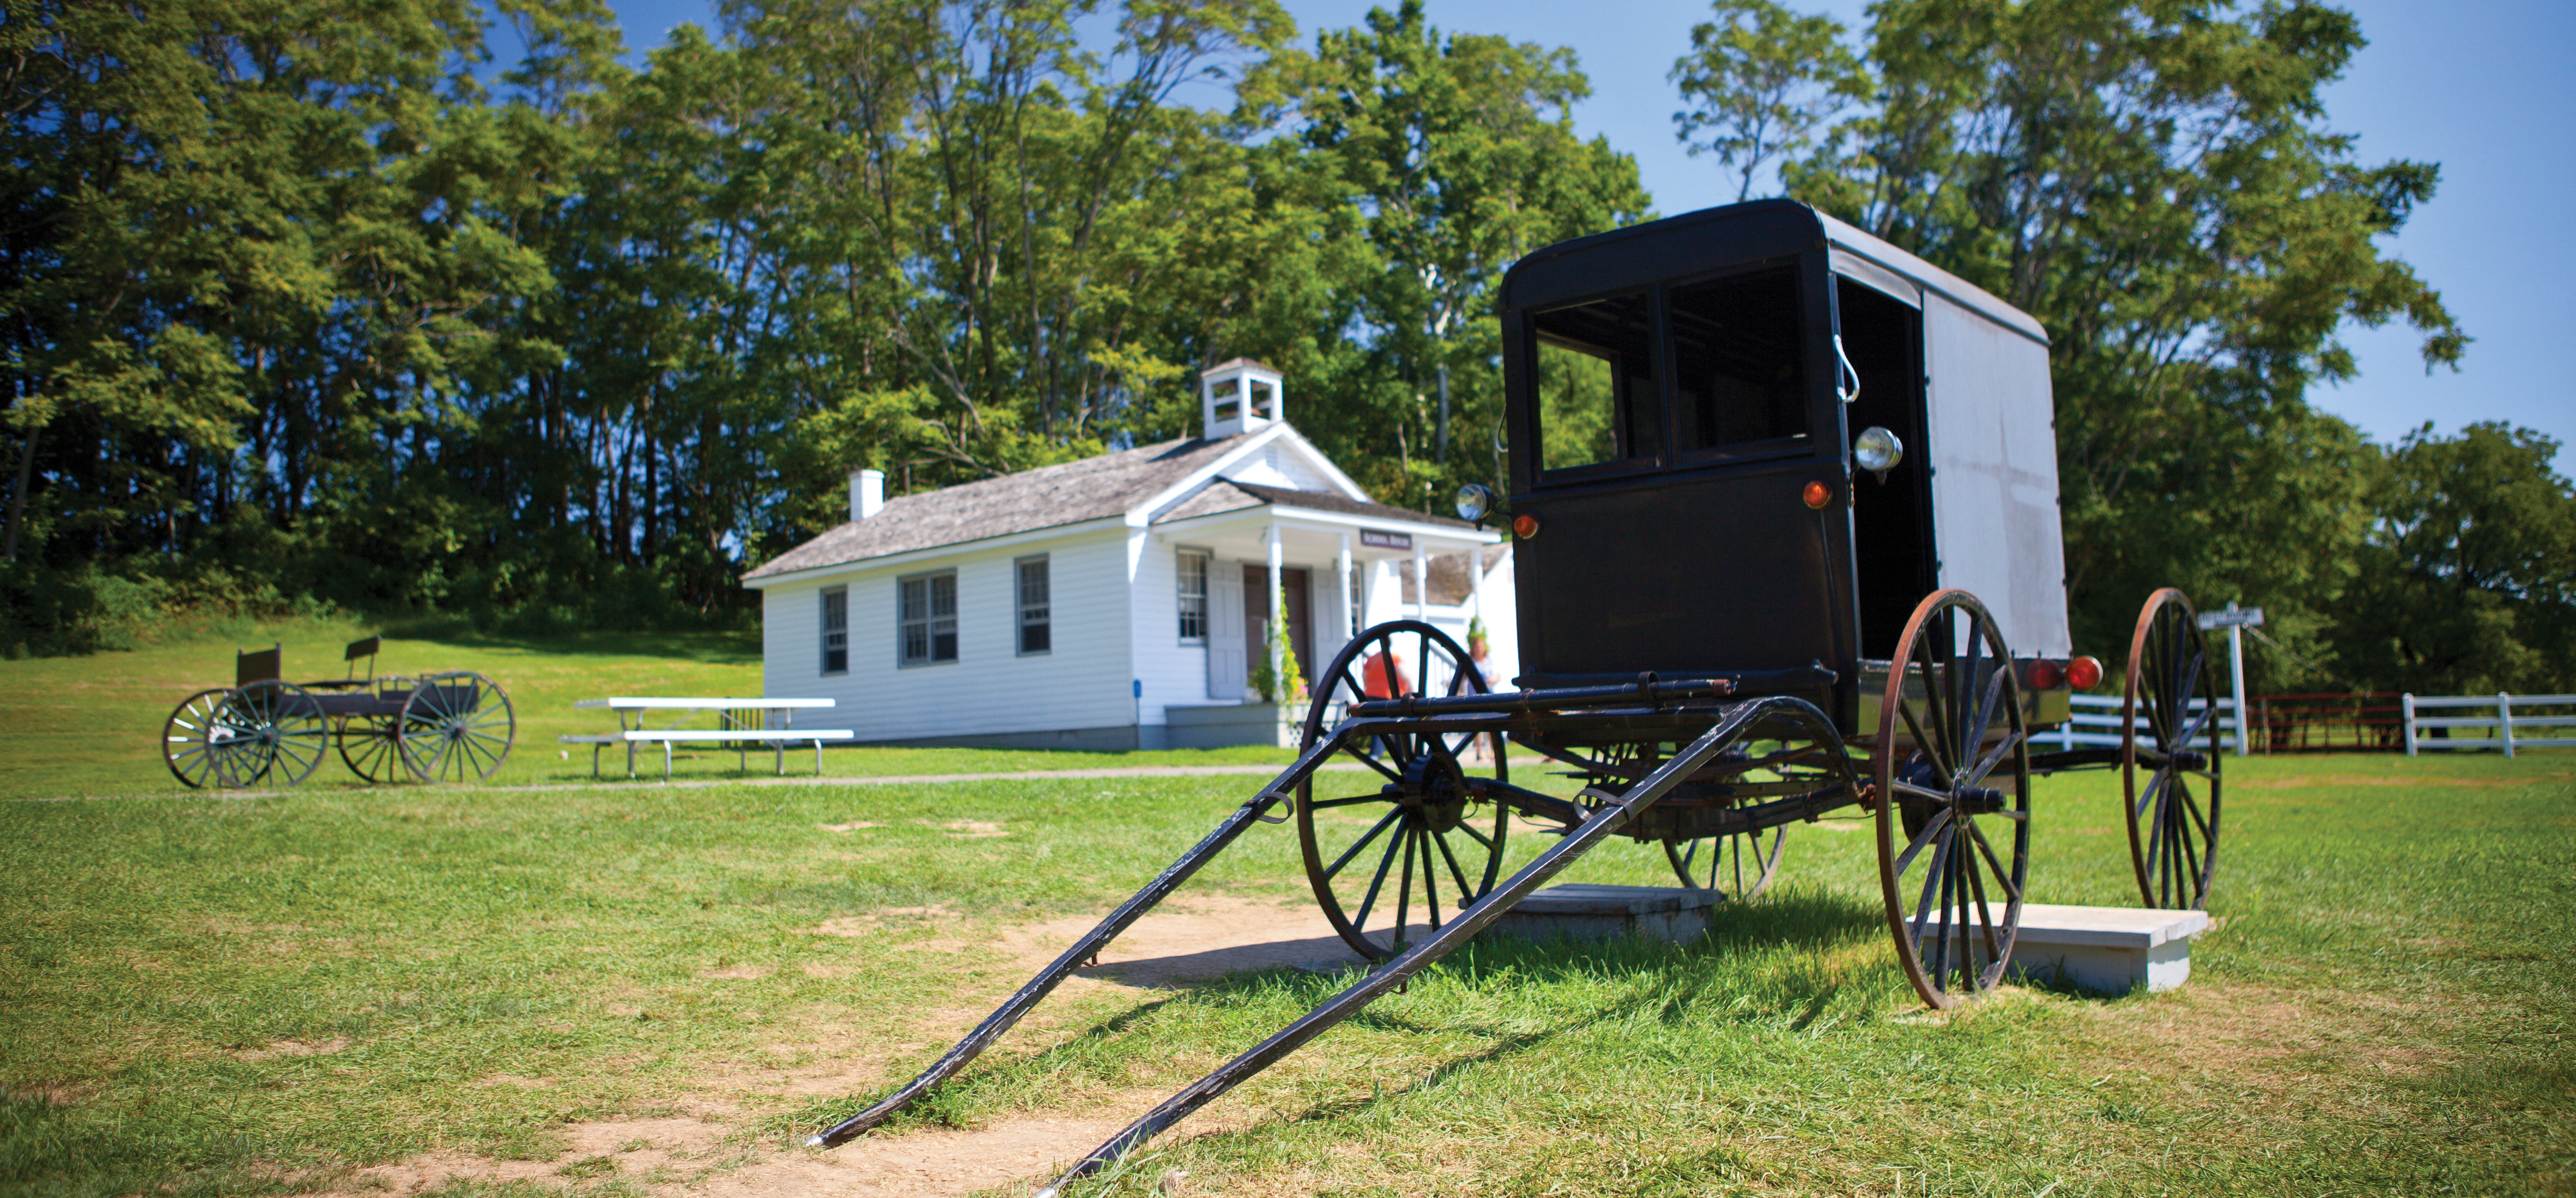 The Amish Village is More Than a Farm and House